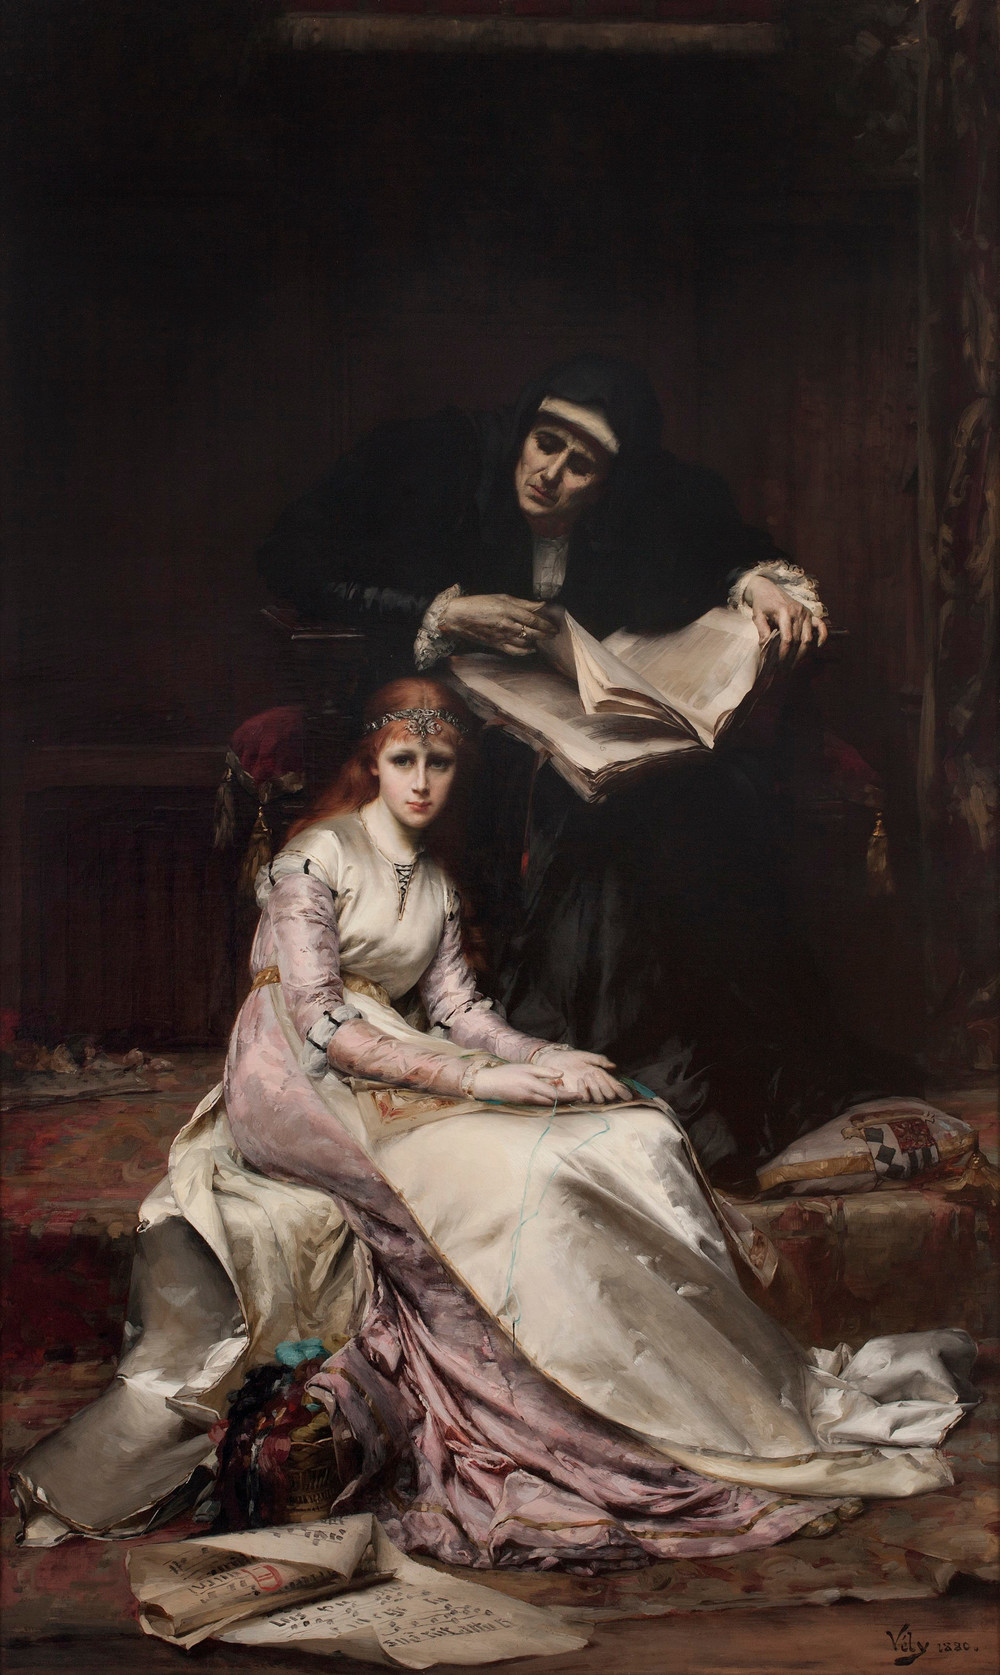 Le Coeur S’Éveille (Awakening of the Heart) (1880). Anatole Vély (French, 1838-1882). Oil on canvas. Lawrence Steigrad Fine Art.
Set in a castle a young Princess sits spellbound at the feet of her grandmother the Queen who has momentarily paused in...